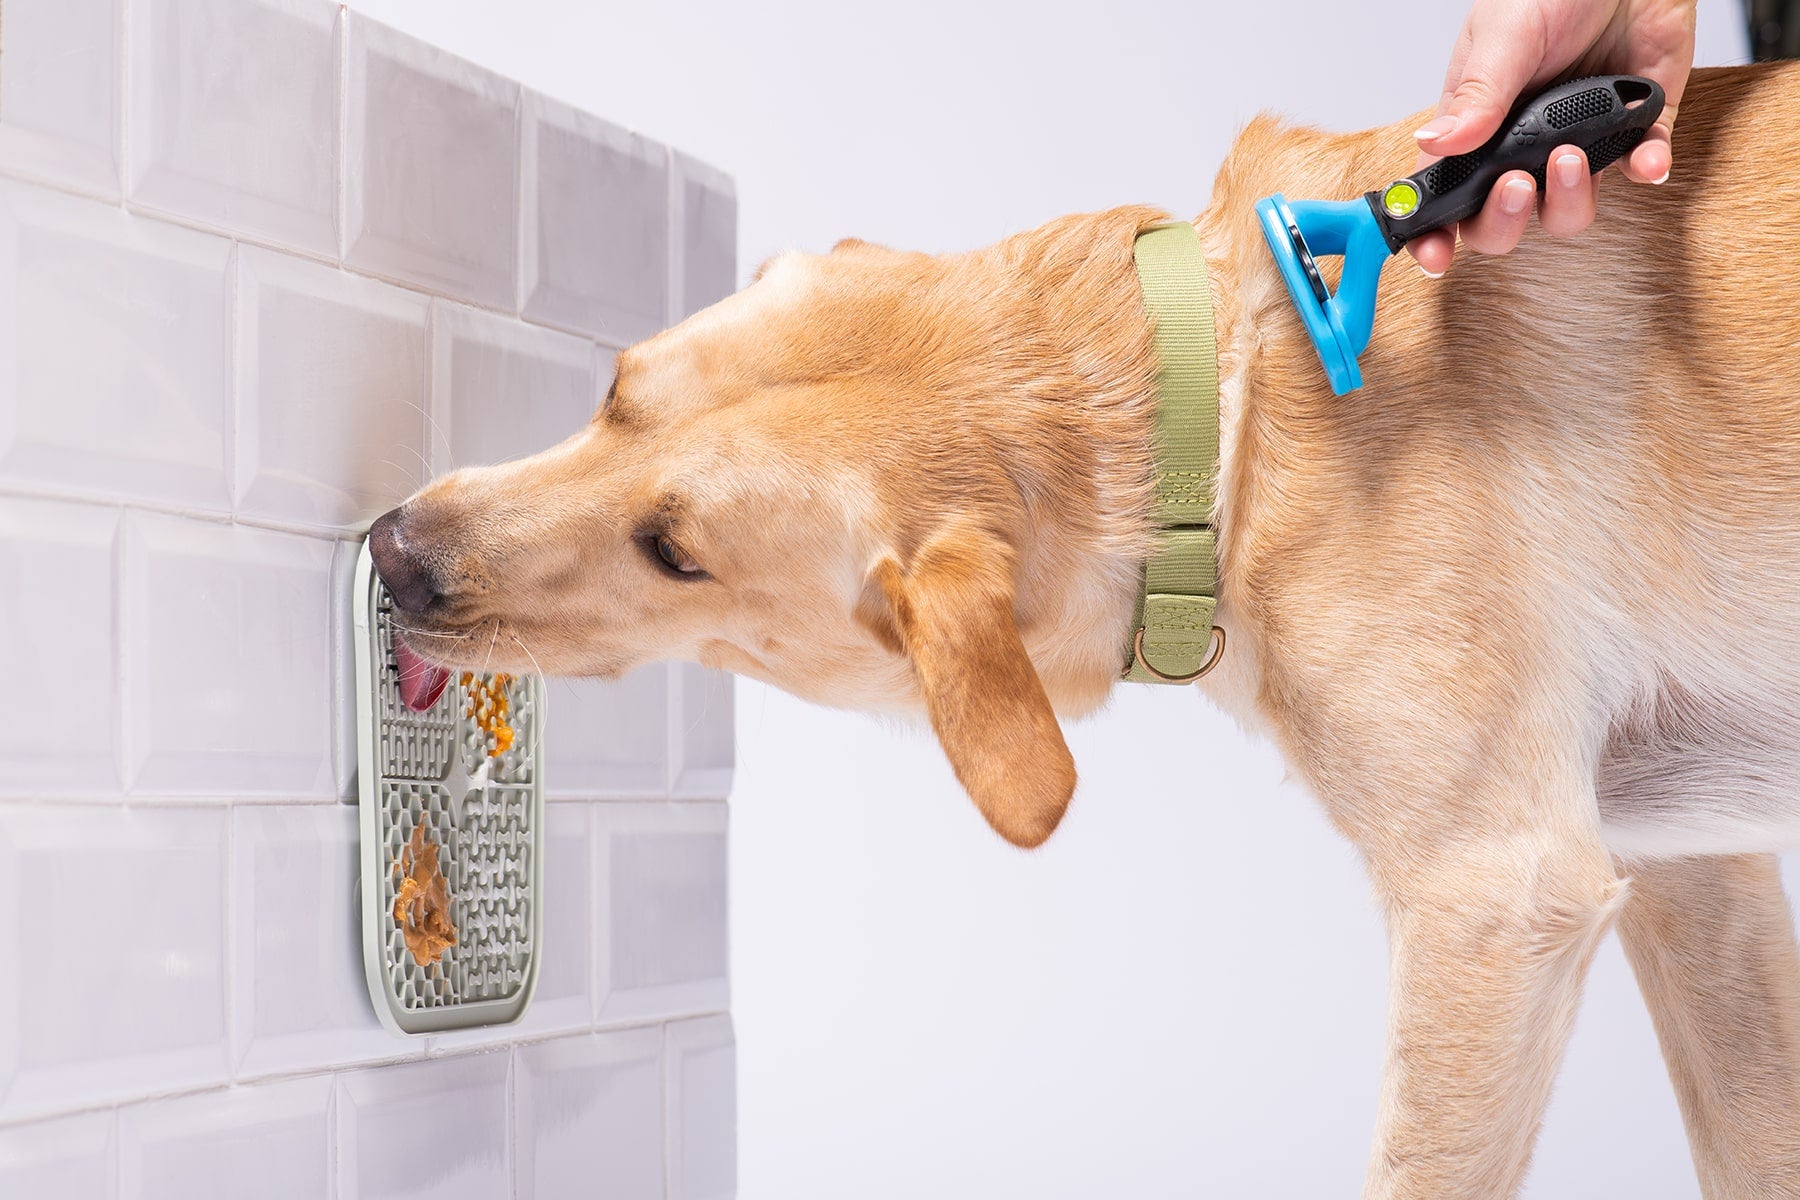 Yellow Labrador dog licks wall mounted lick mat covered in peanut butter while being groomed.